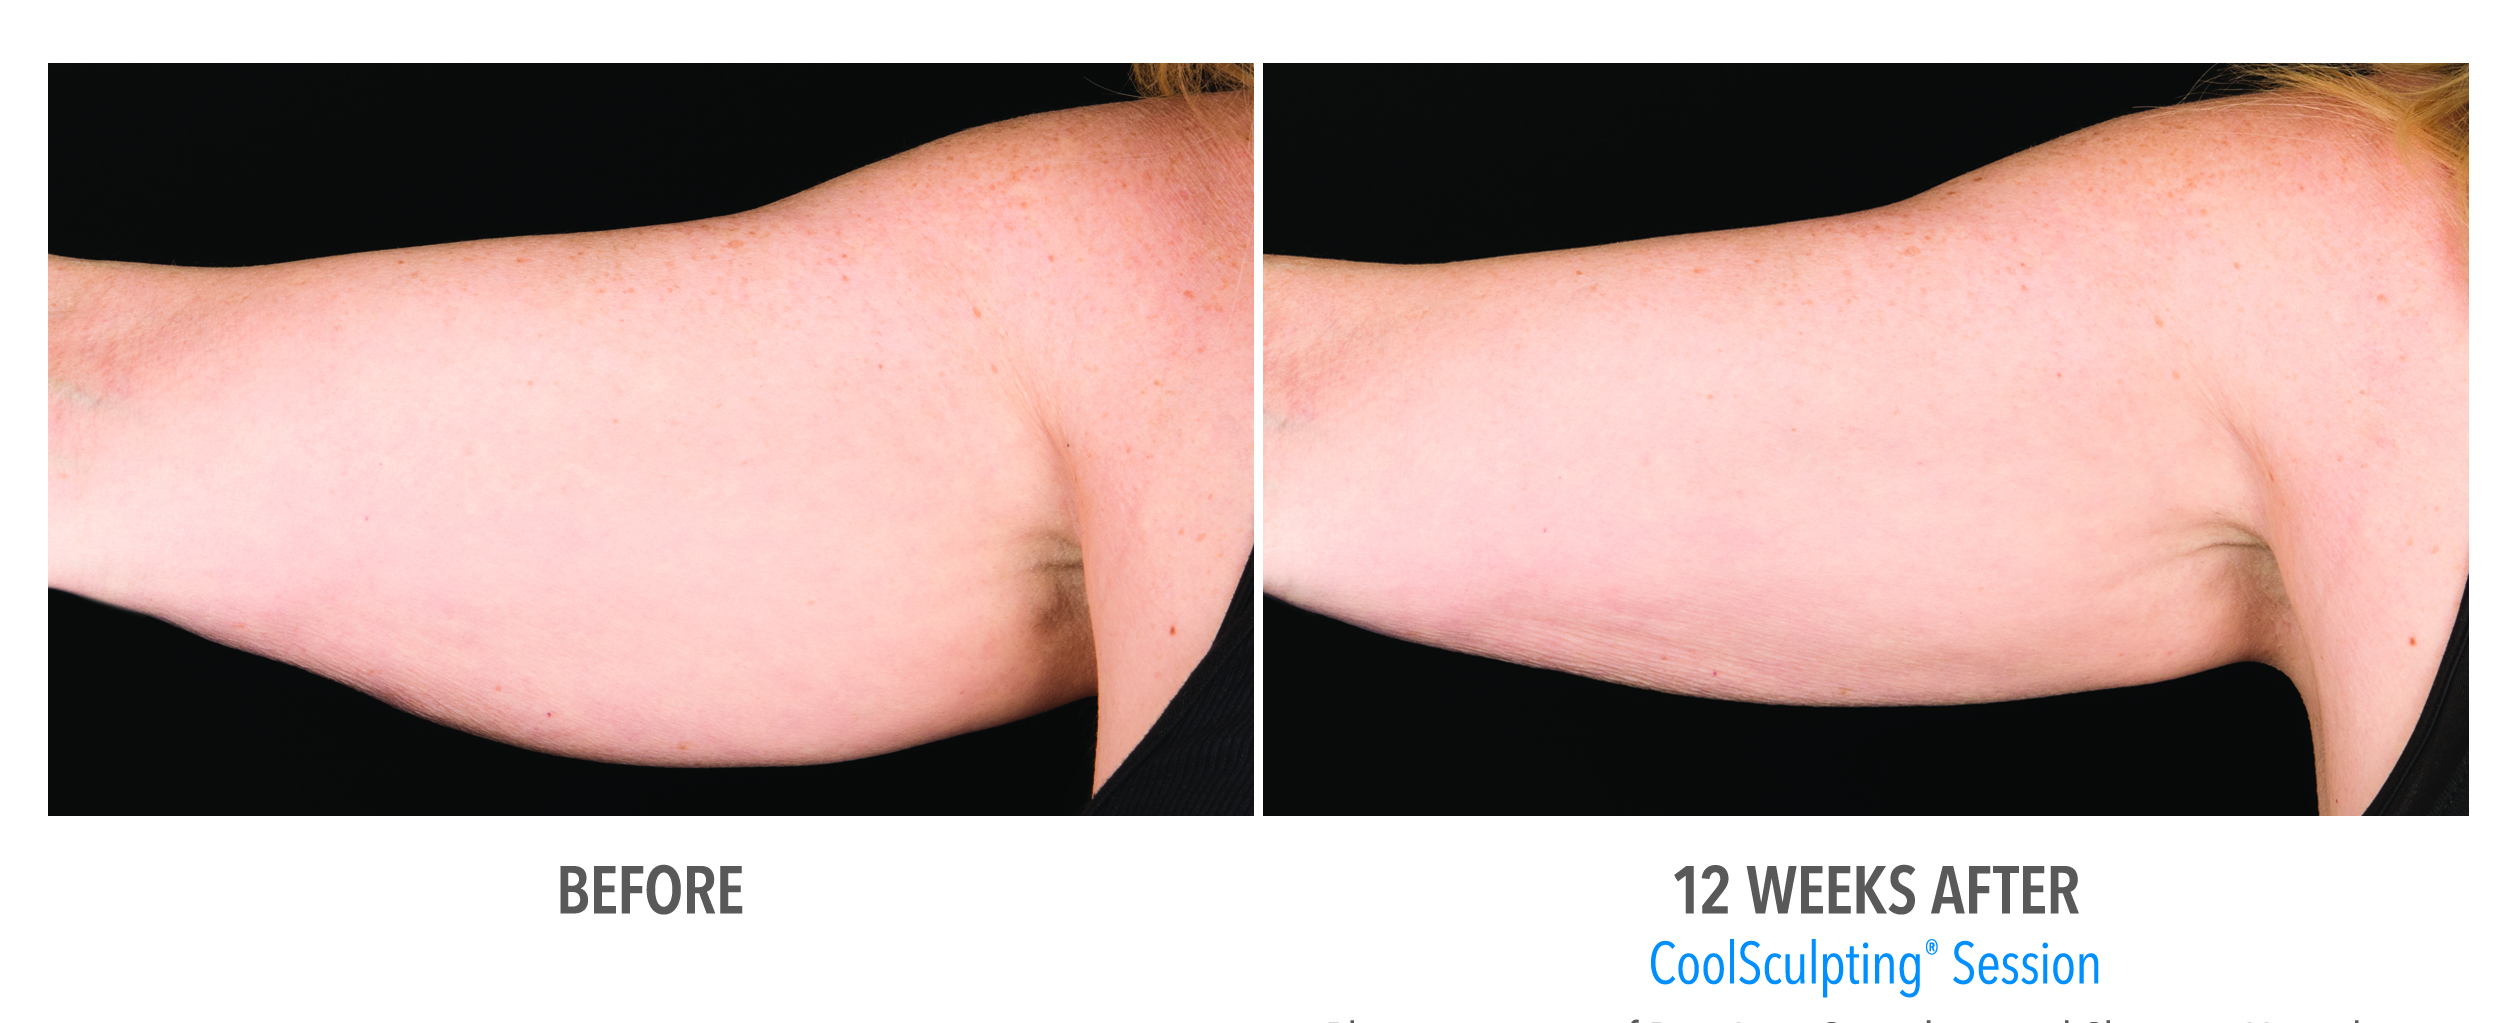 rosacea on upper arms